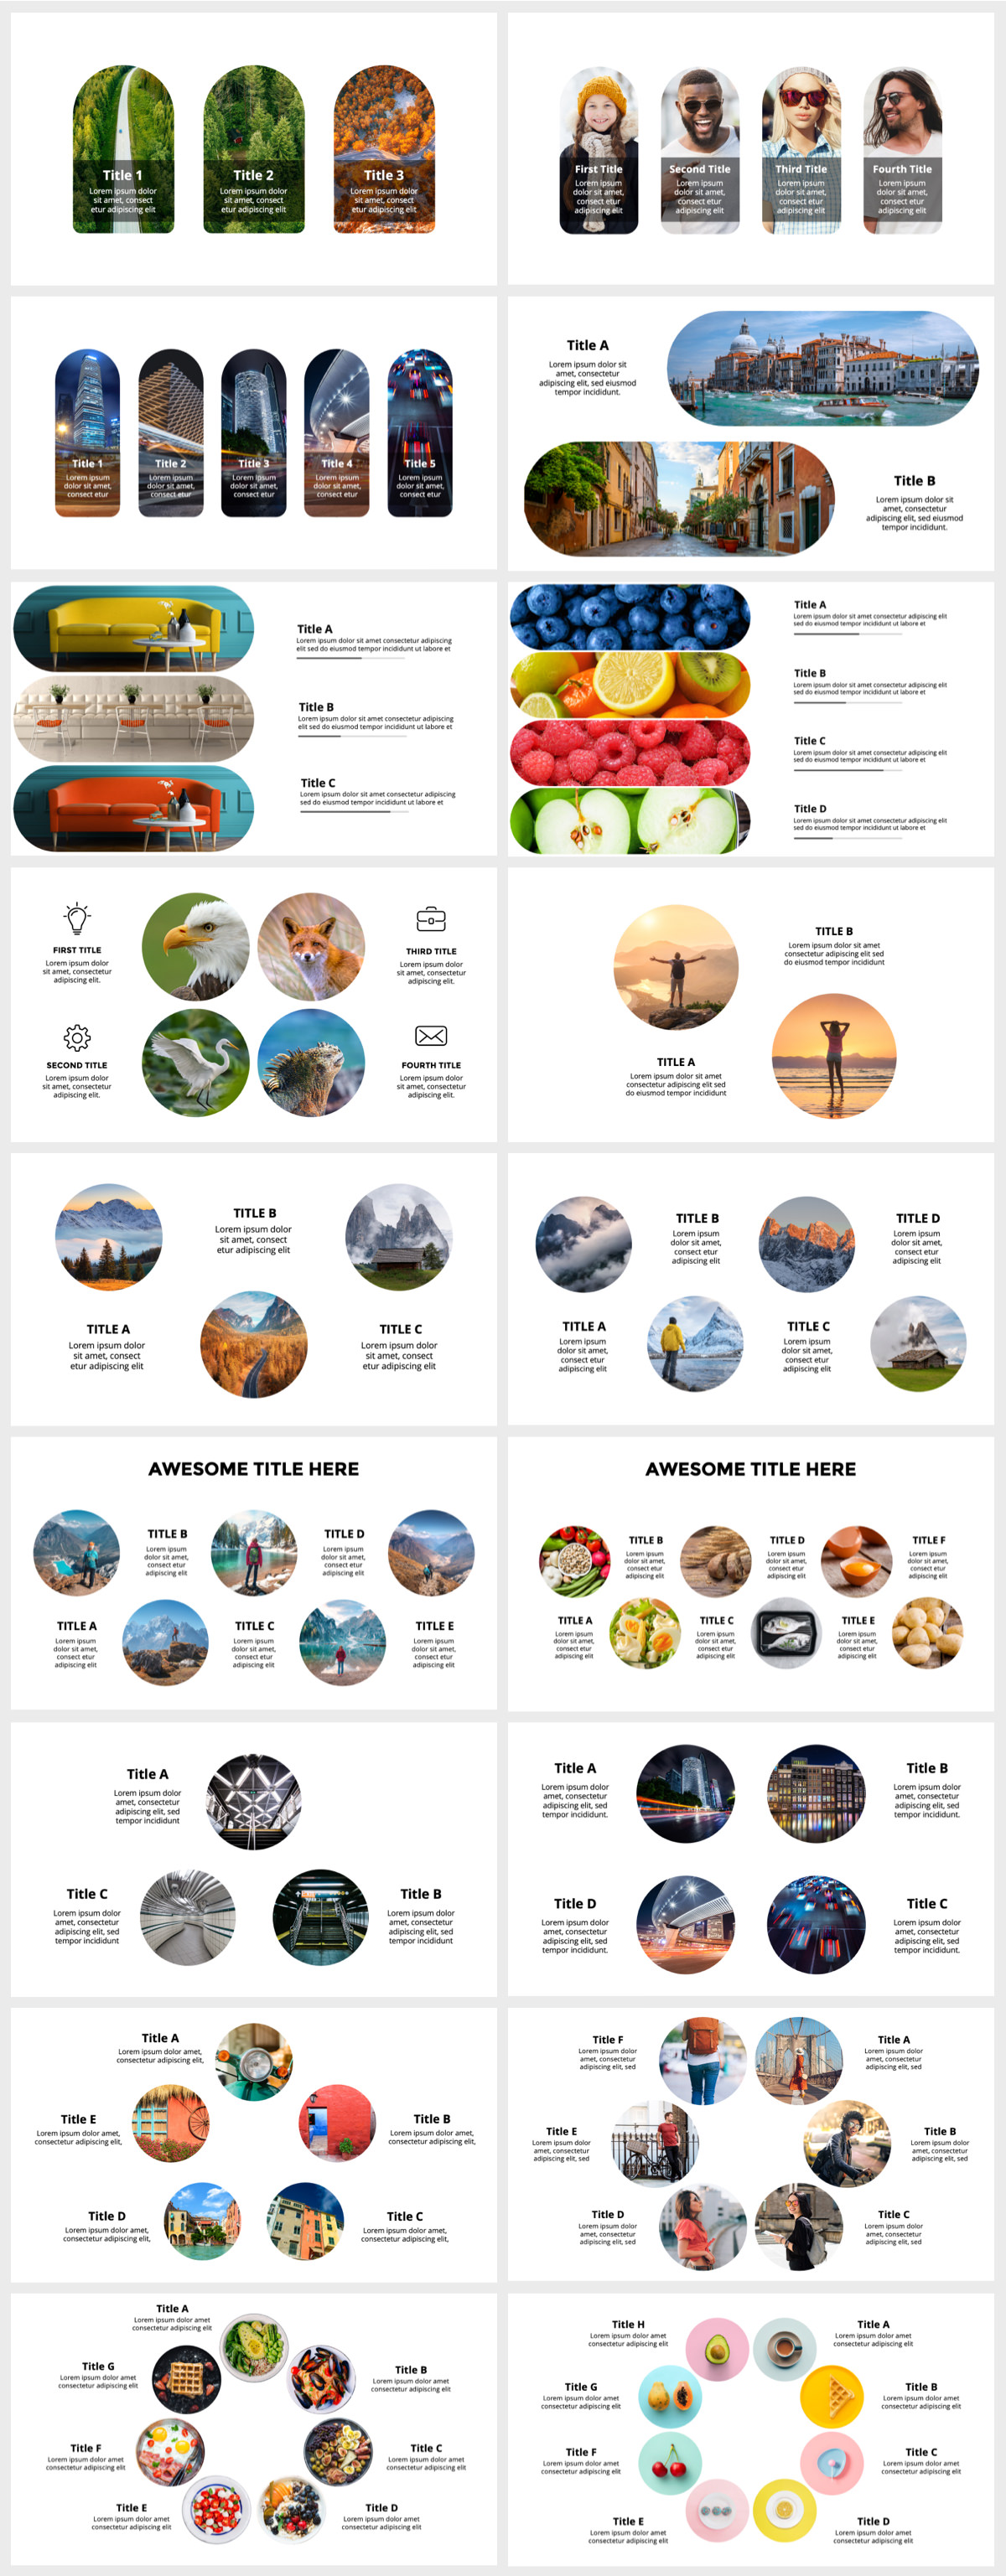 Wowly - 3500 Infographics & Presentation Templates! Updated! PowerPoint Canva Figma Sketch Ai Psd. - 262